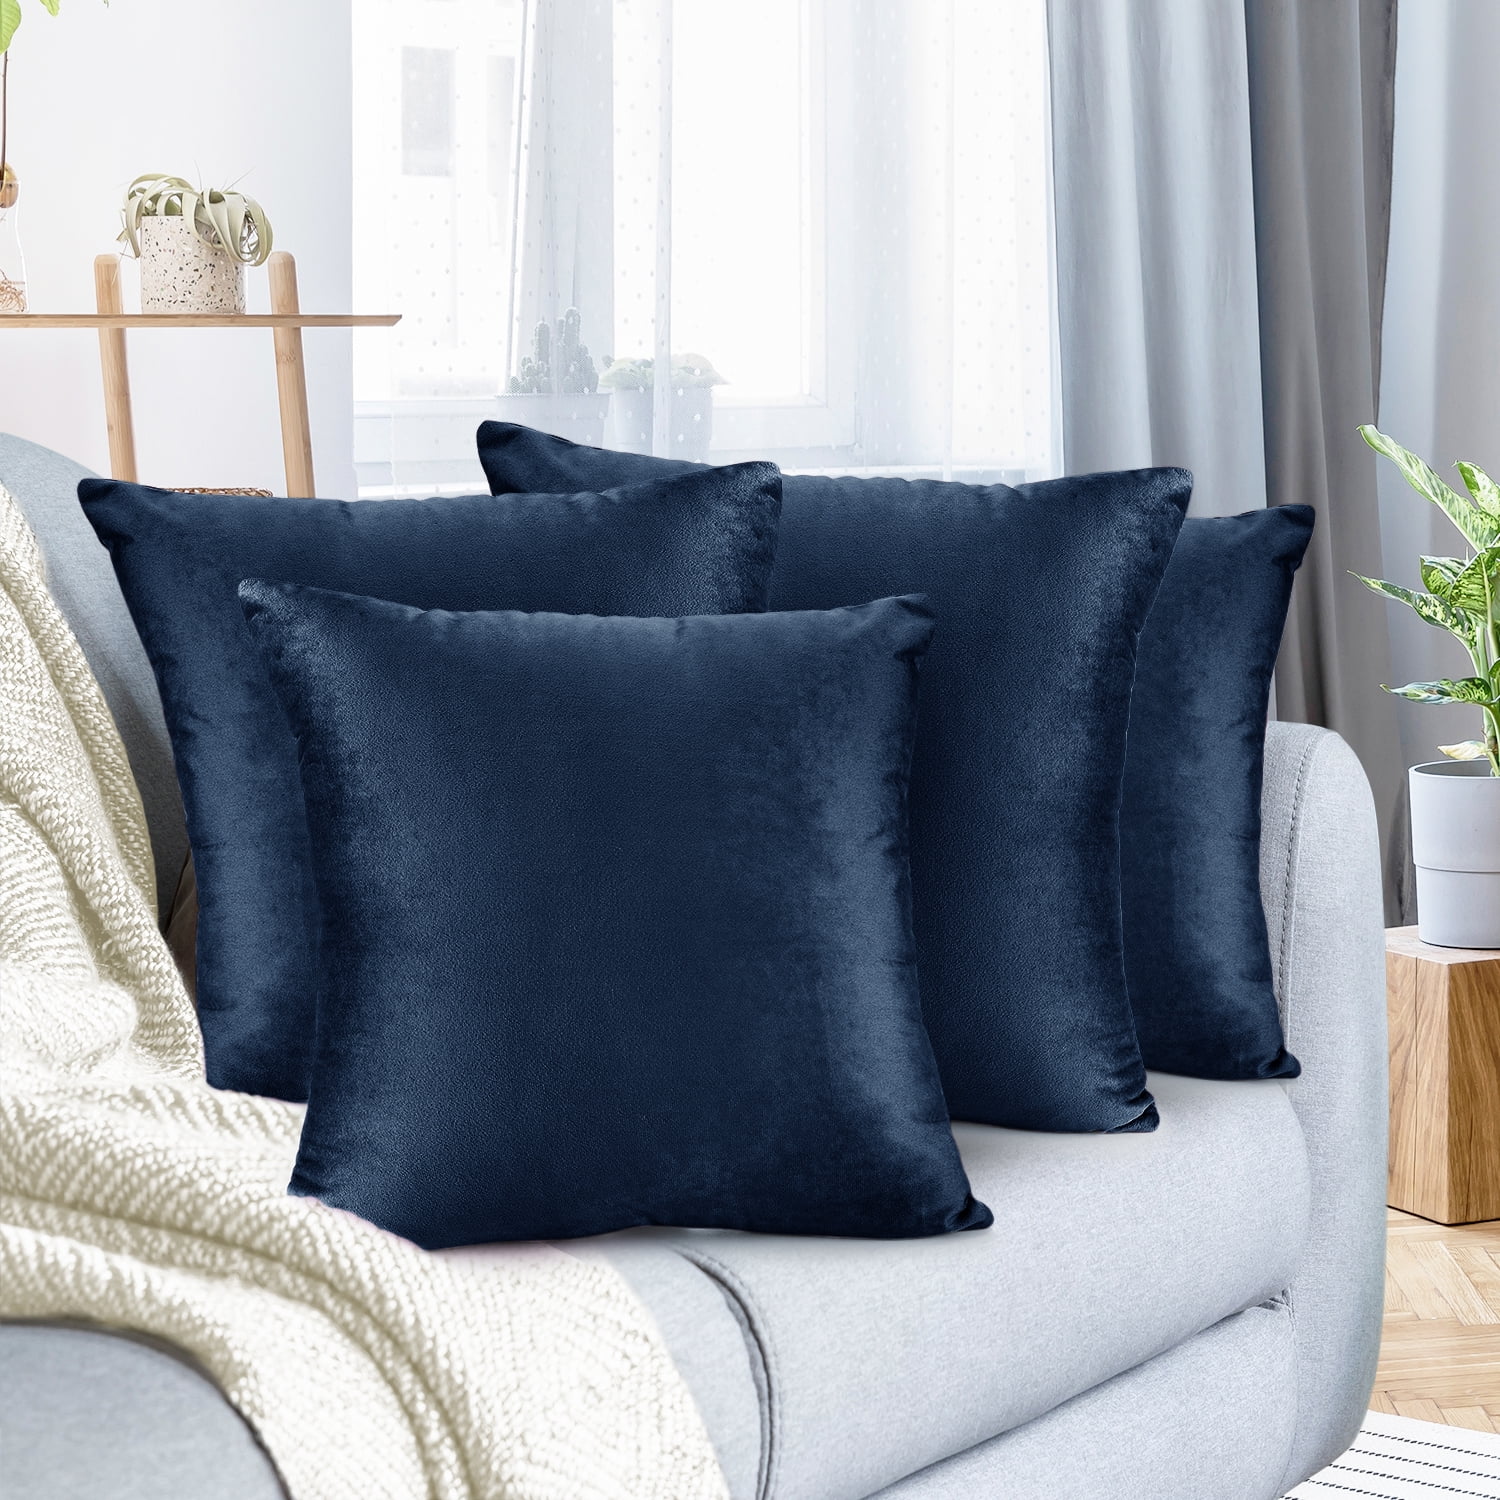 Pack of 4 Velvet Throw Pillow Covers Decorative Soft Square Cushion Cover , 24" x 24" Walmart